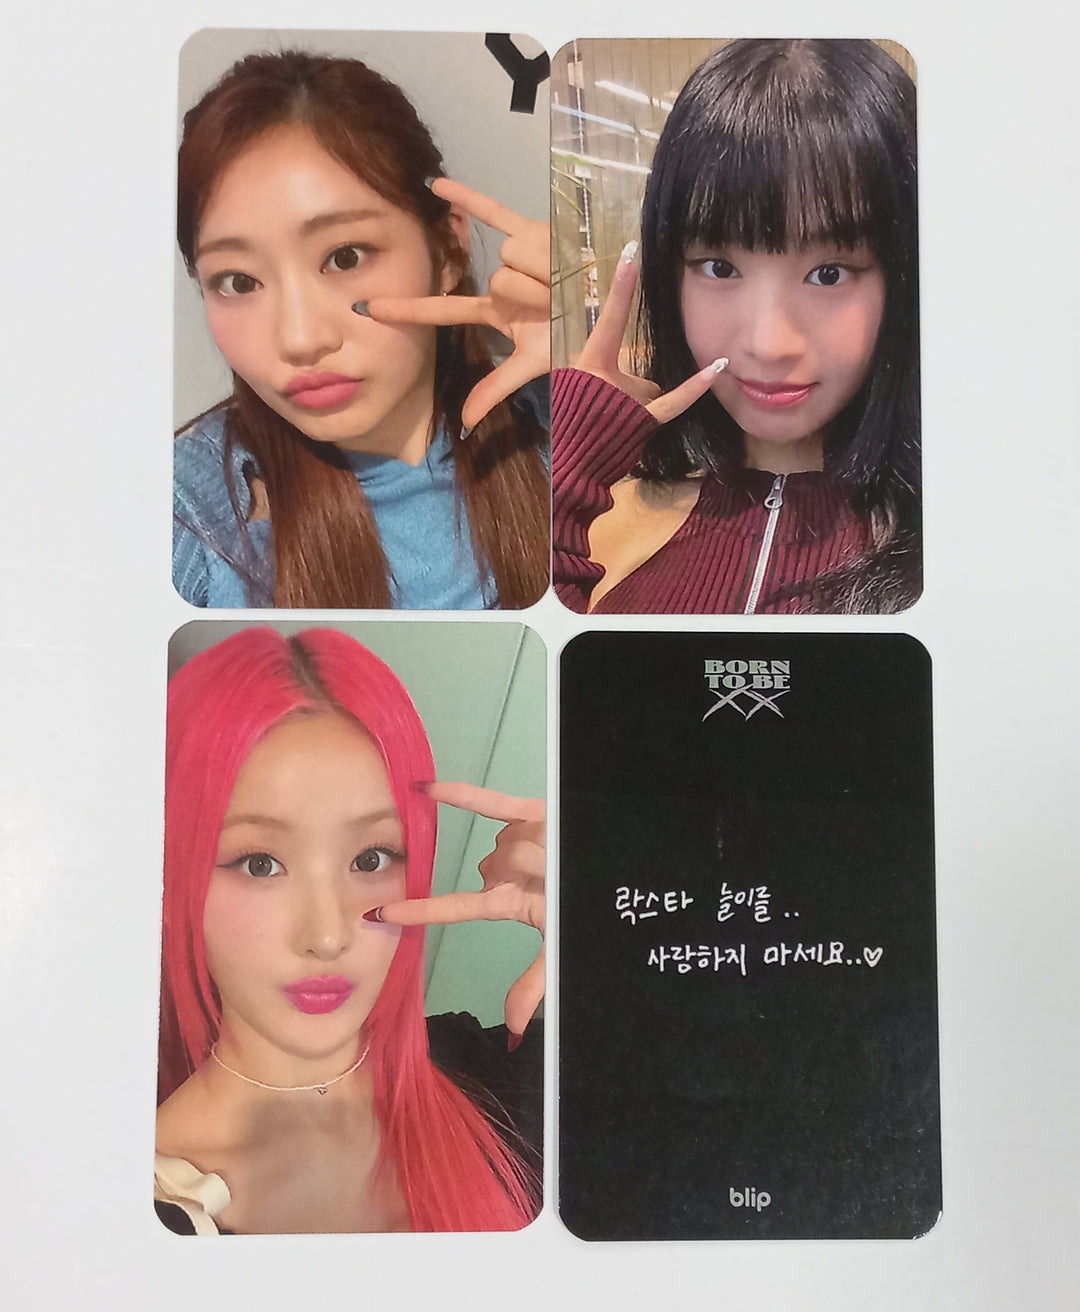 KISS OF LIFE "Born to be XX" - Blip Fansign Event Photocard [24.1.19]